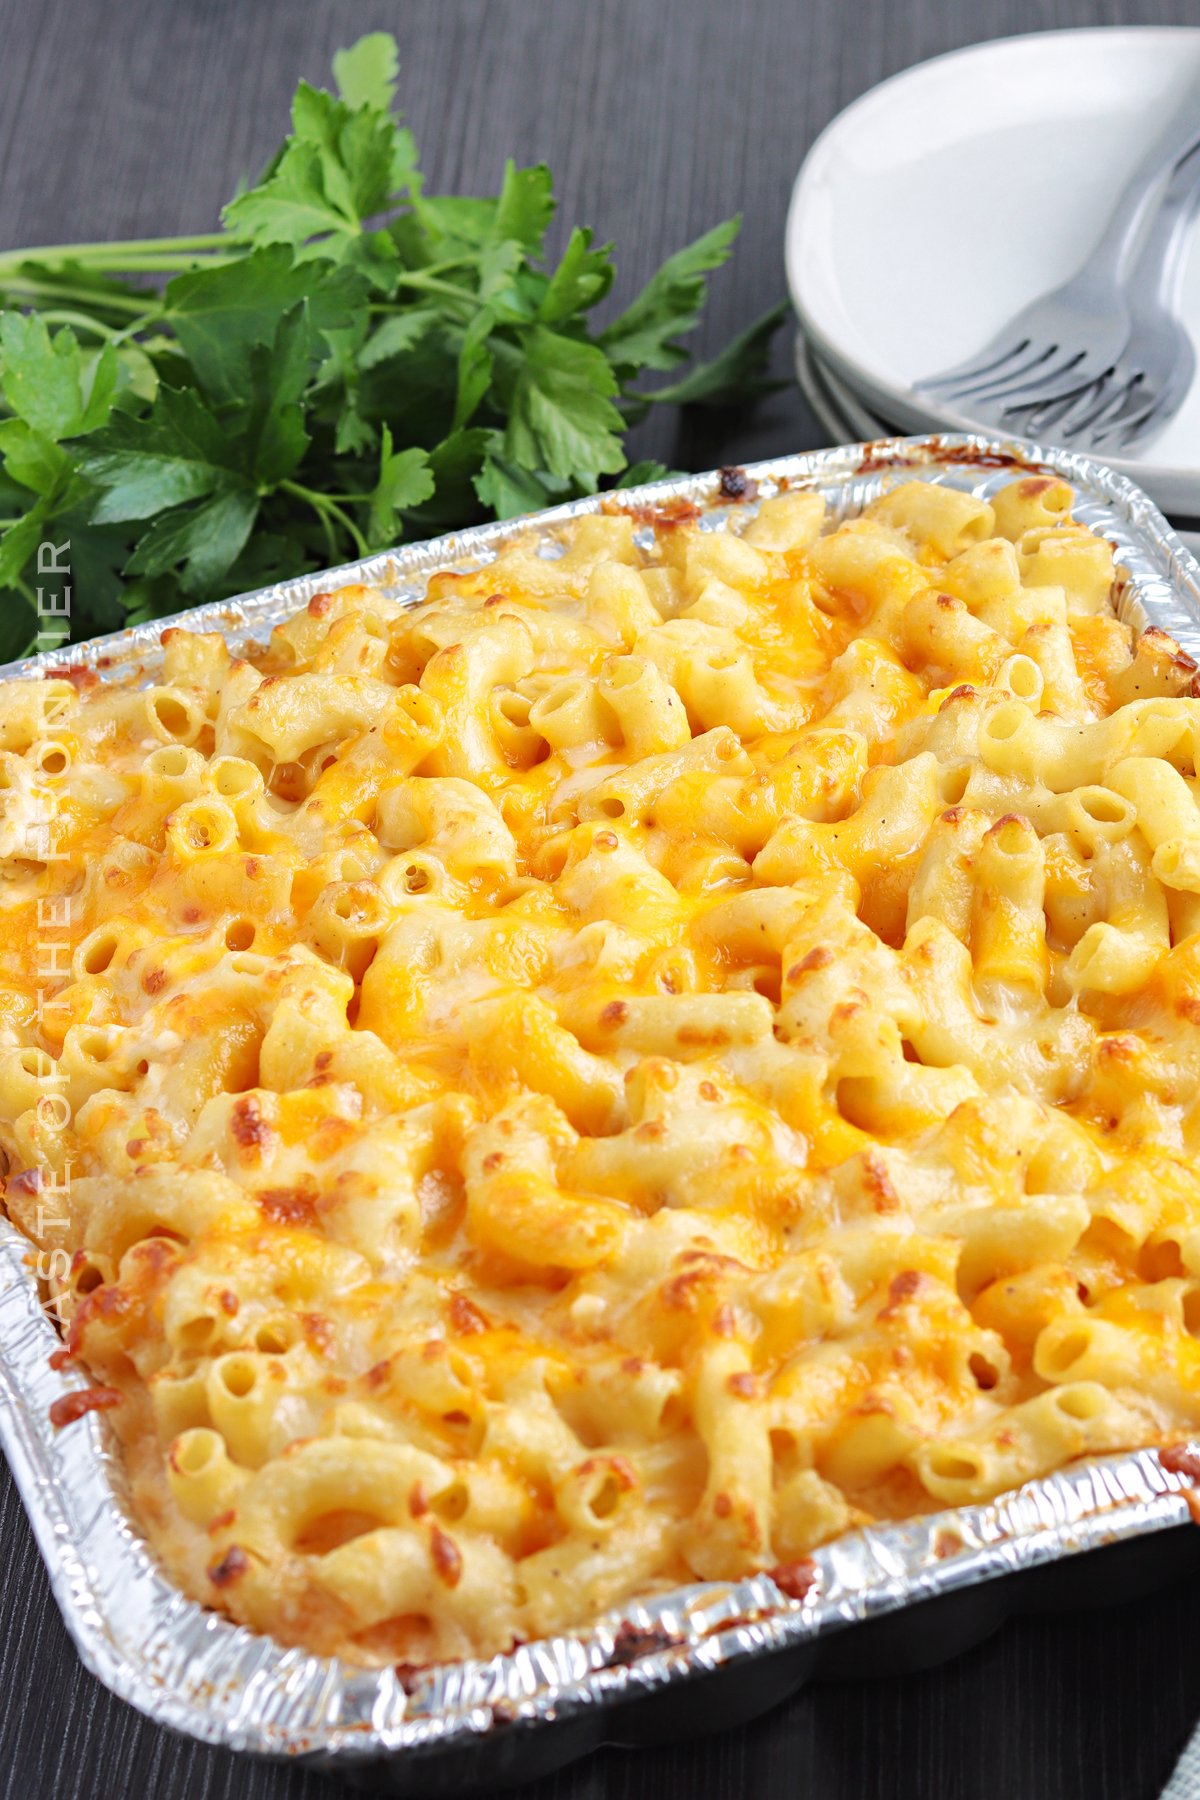 Recipe for Smoked Mac and Cheese